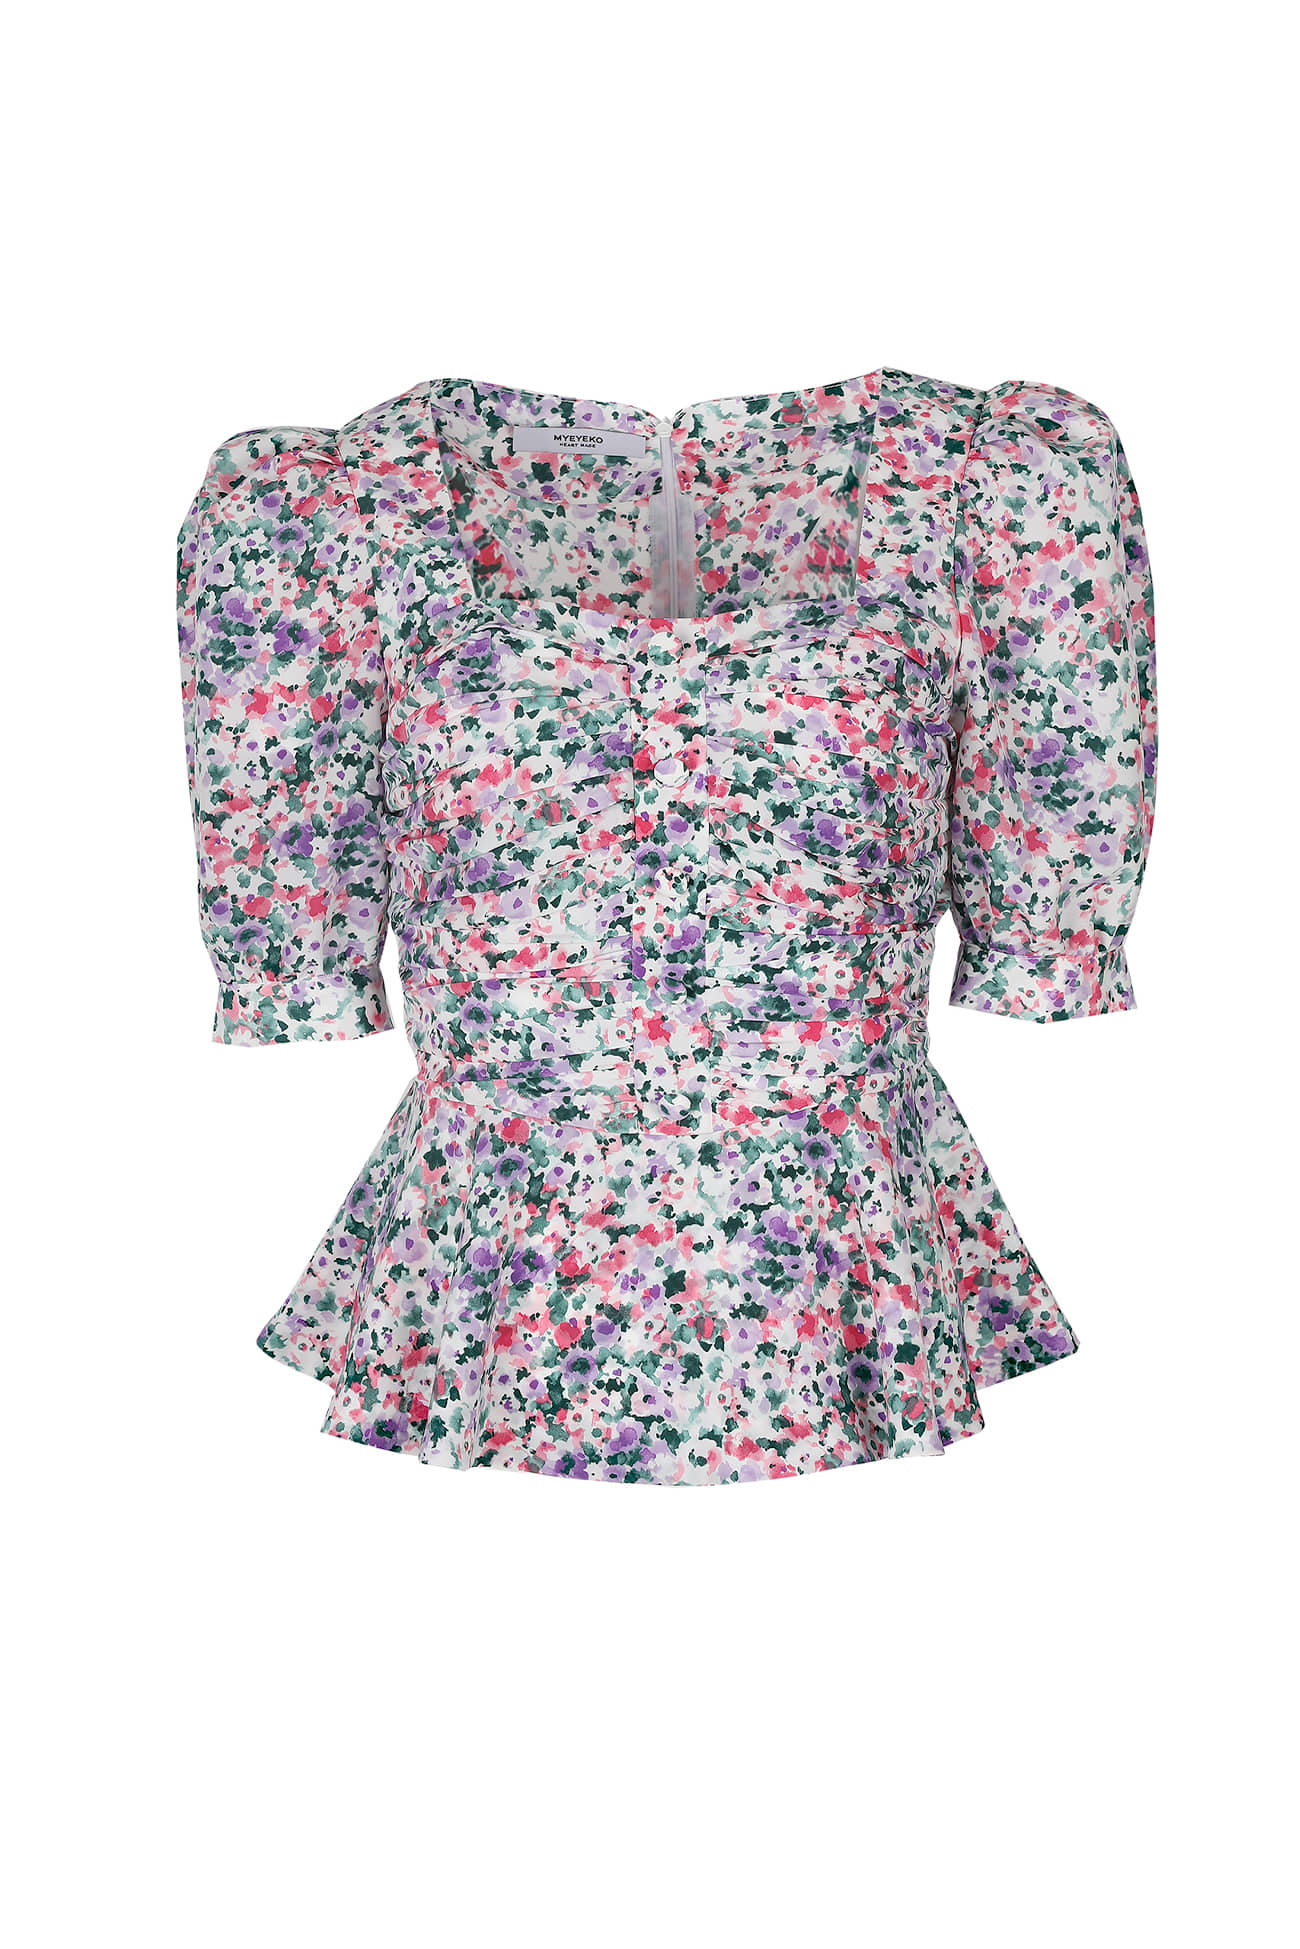 HIGH QUALITY LINE - Floral Pattern Fabric Blouse